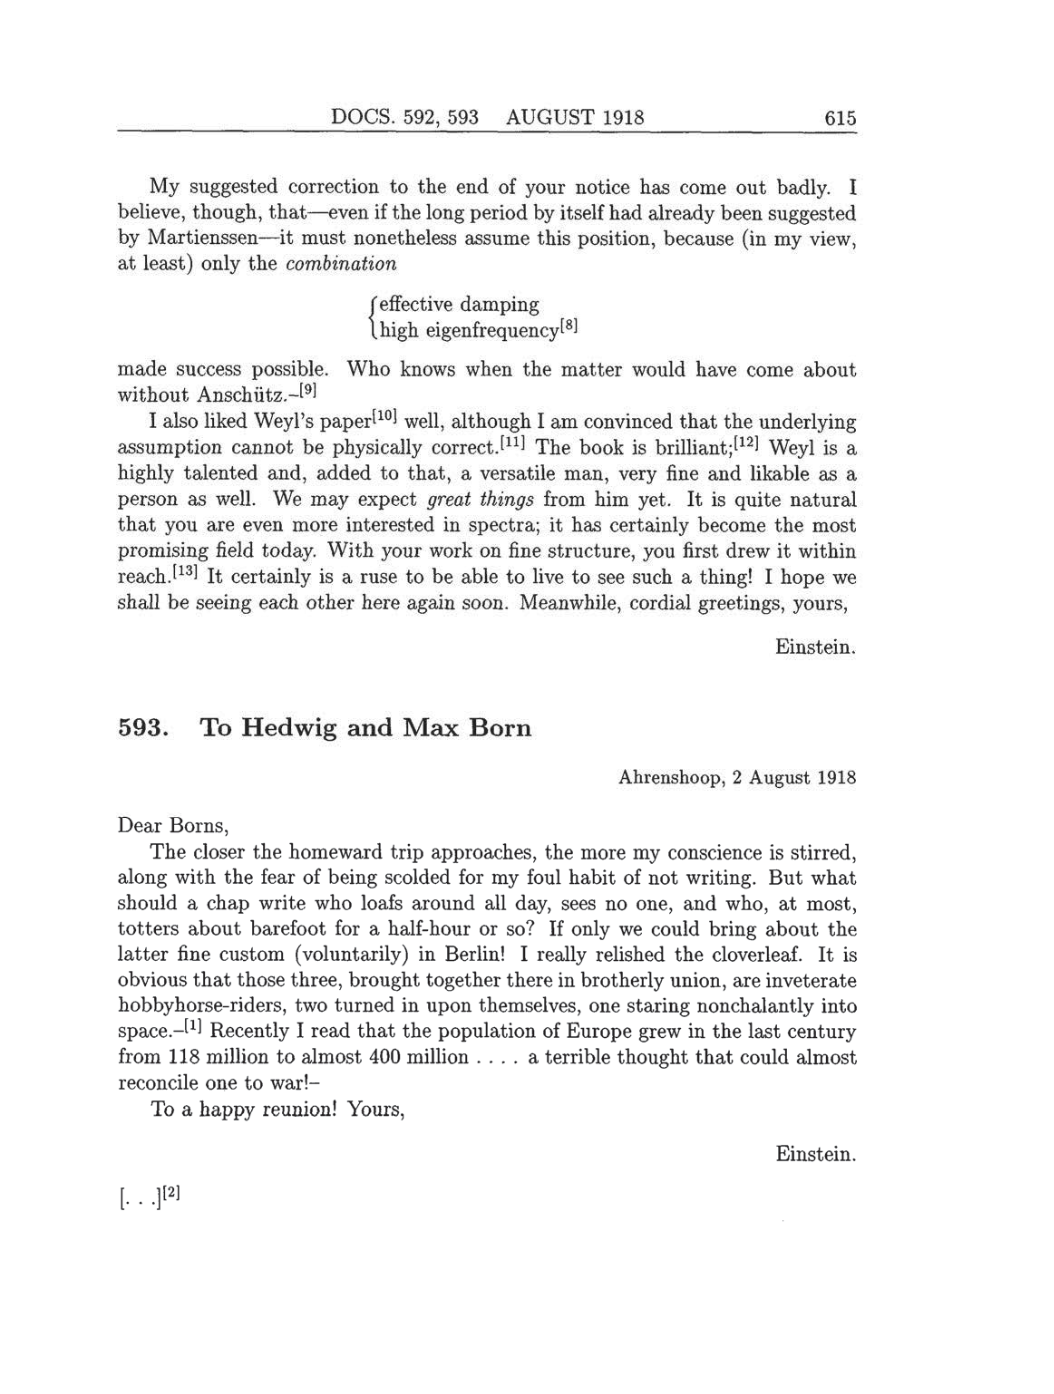 Volume 8: The Berlin Years: Correspondence, 1914-1918 (English translation supplement) page 615